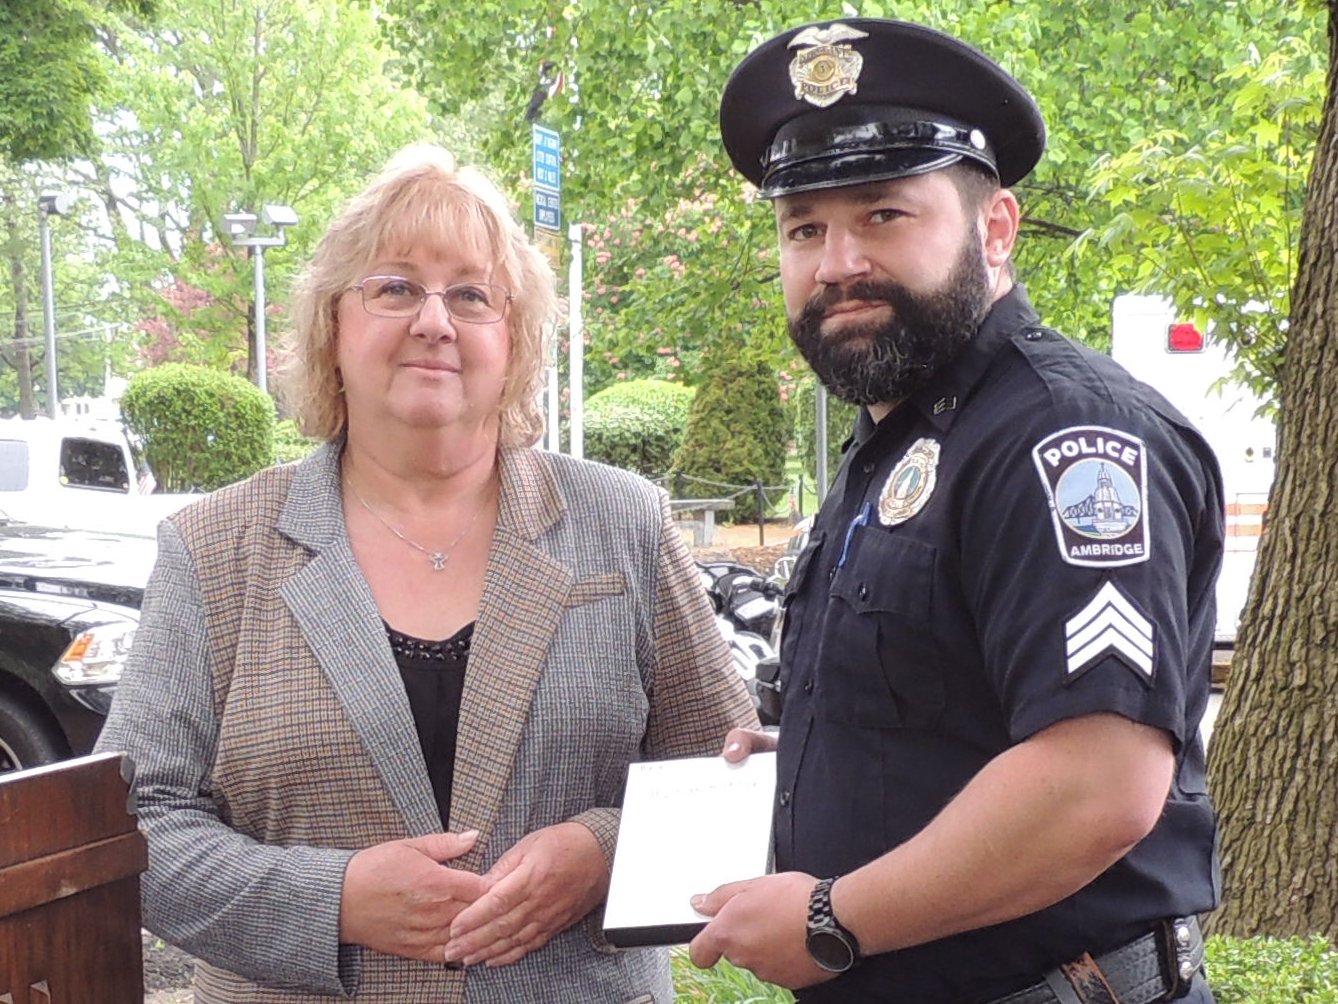 Advocacy Coordinator Millie Anderson presents an award for exemplary service in handling domestic violence cases to Officer A.J. Bialik (Ambridge Police Department).